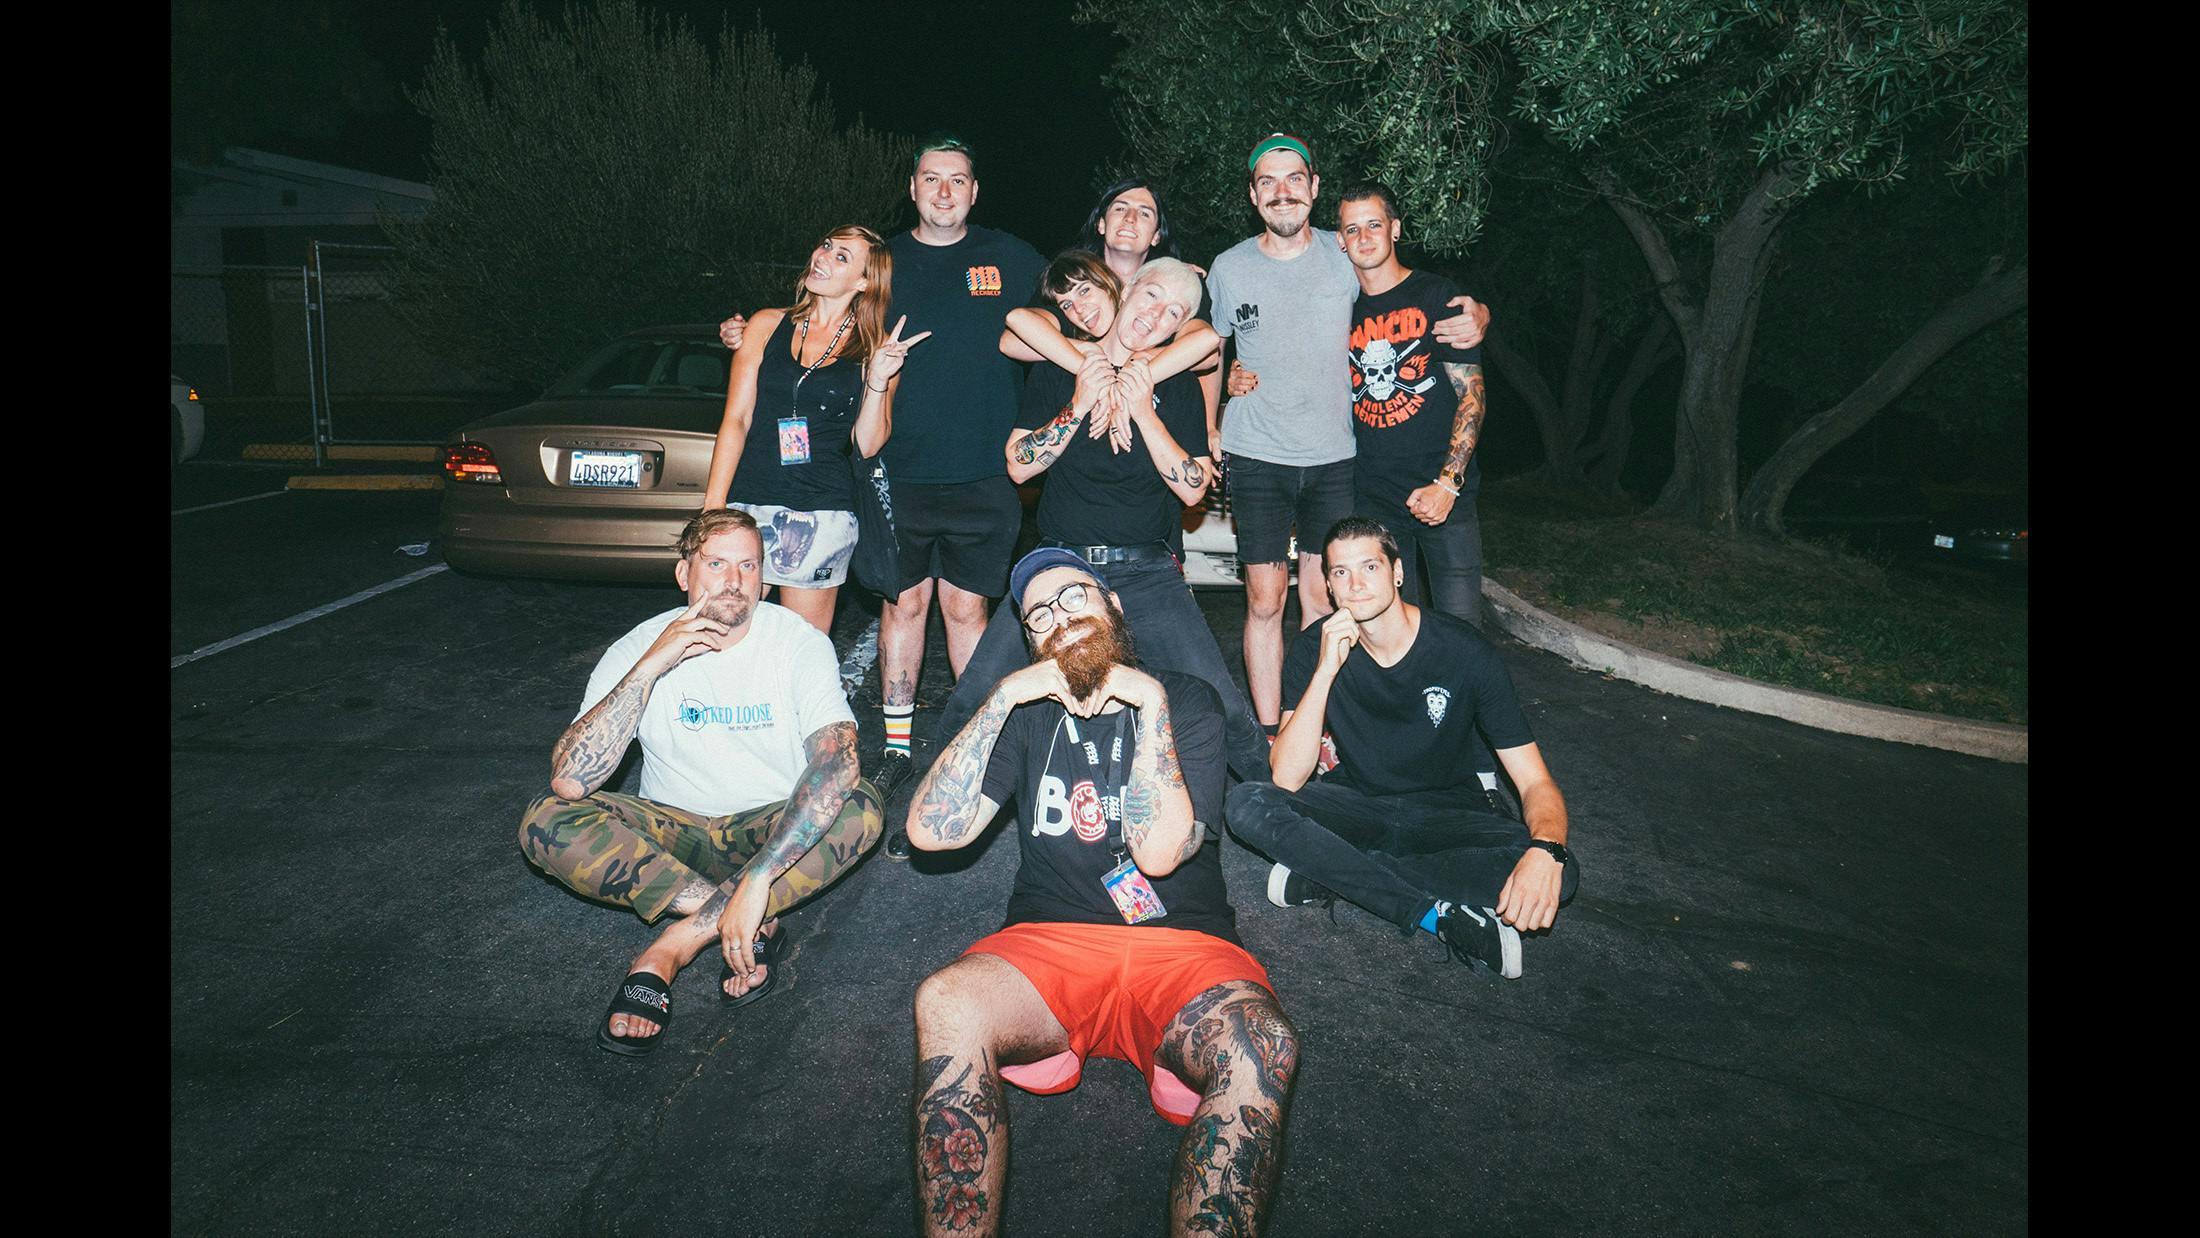 End of tour crew shot, this was Team Creep Warped Tour 2k17, taken by @josh_the_high_five_guy_ (dude outside of Denny’s who took this photo insisted on a photo credit)